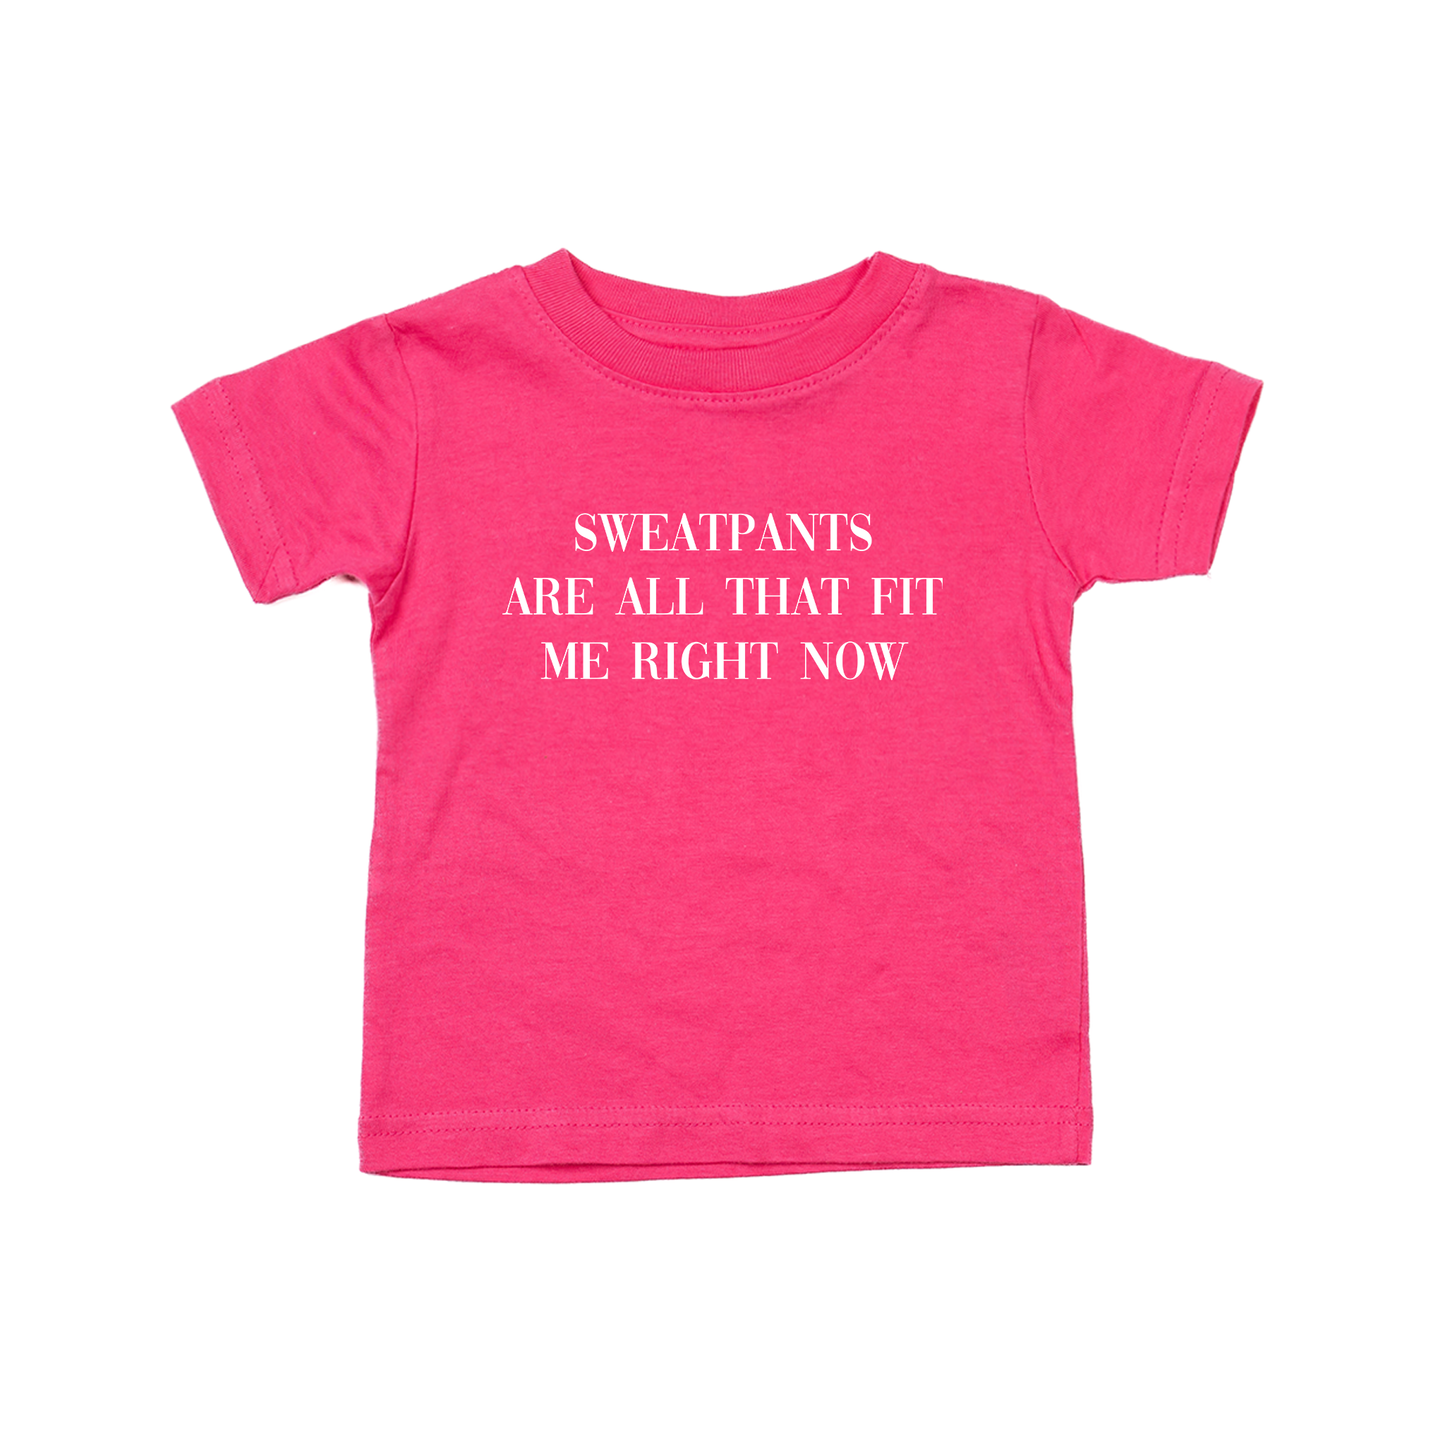 Sweatpants are all that fit me right now (White) - Kids Tee (Hot Pink)